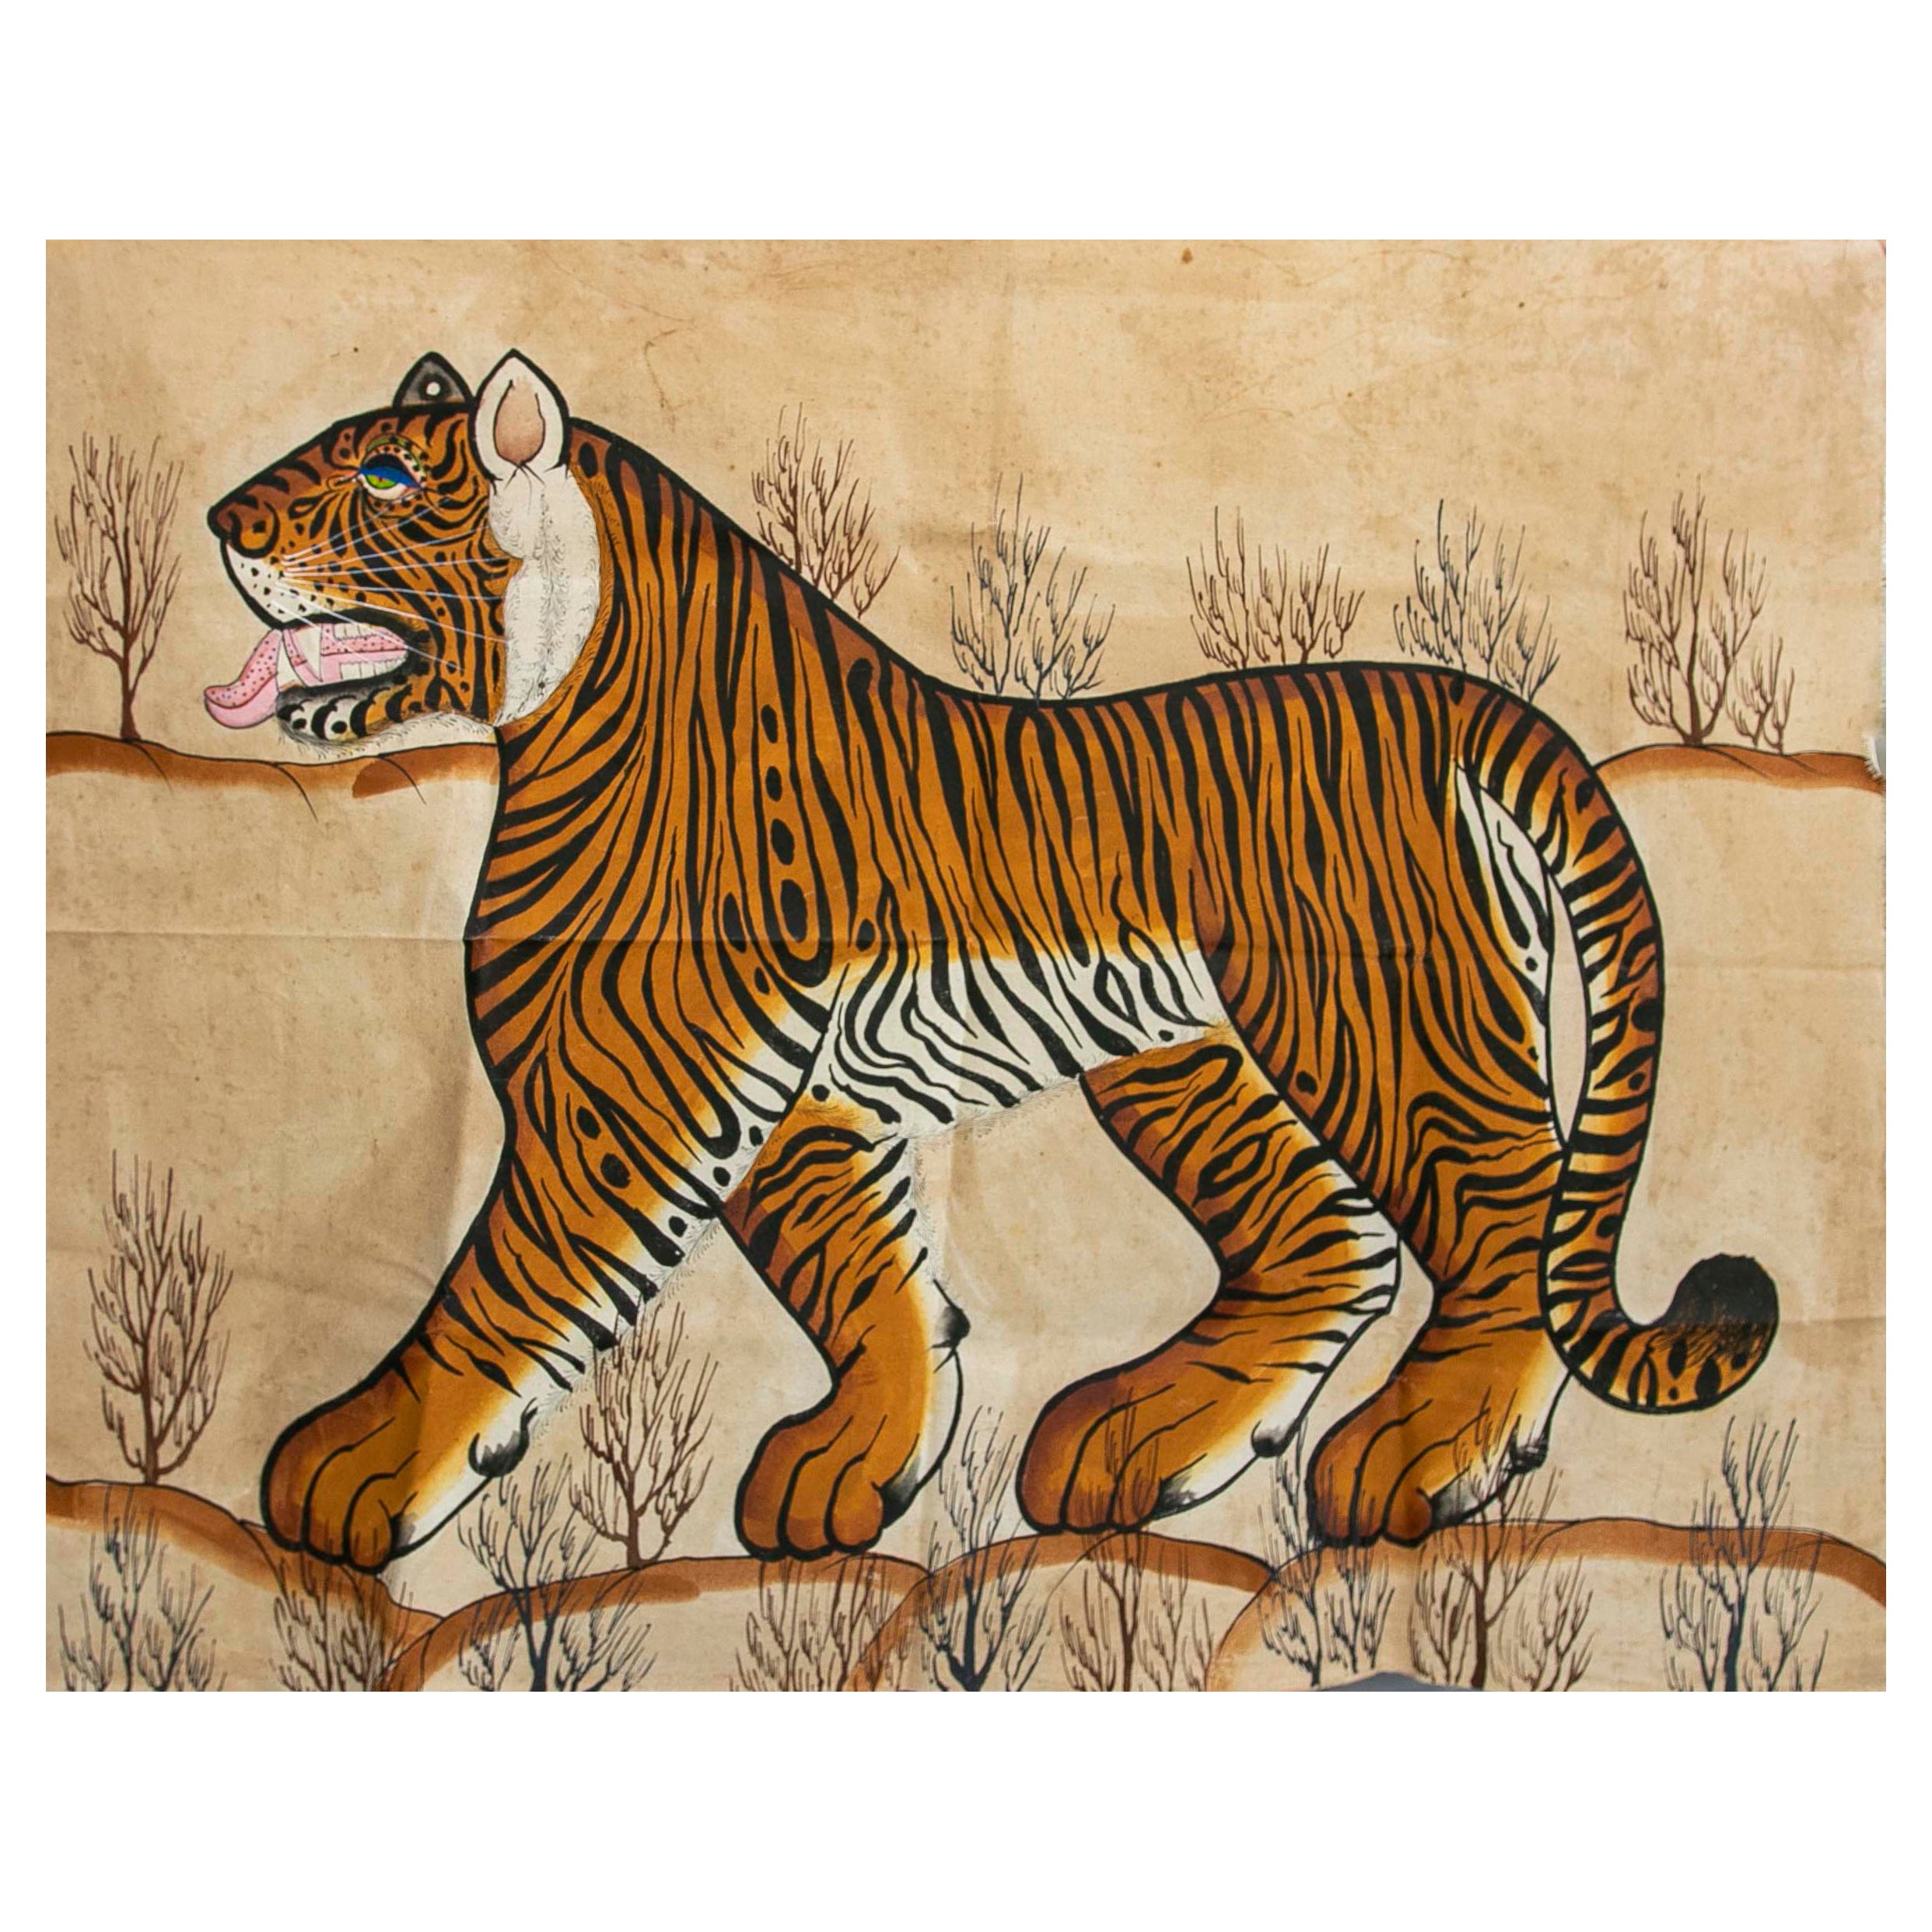 1970s Jaime Parlade Designer Hand Painting "Tiger" Oil on Canvas For Sale